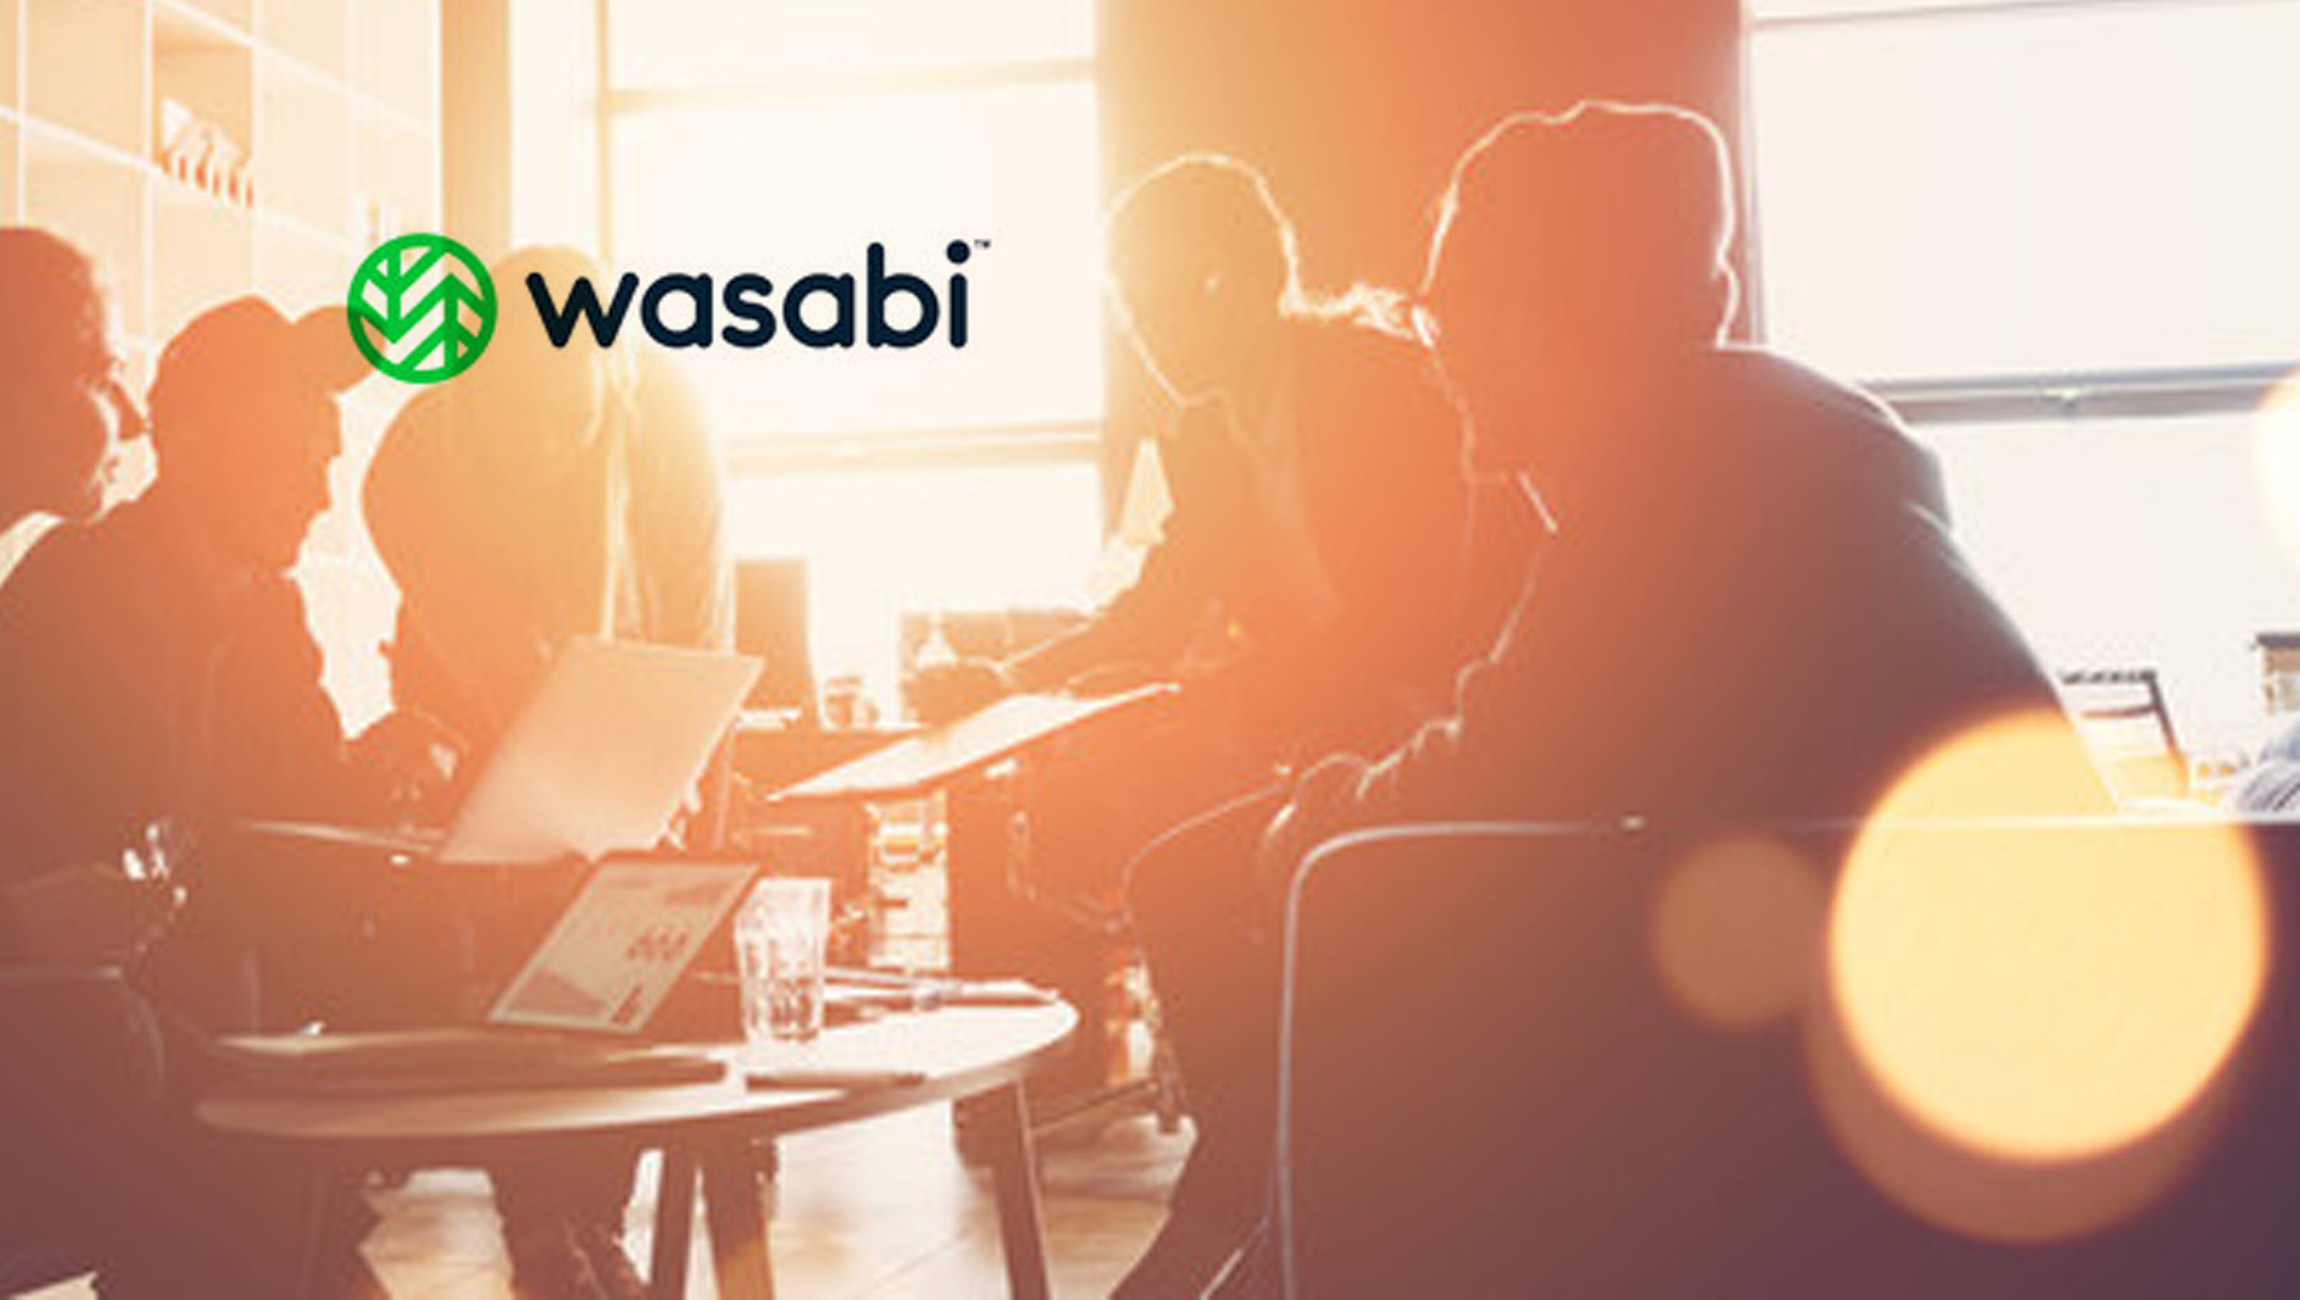 Wasabi Technologies Opens Its First German Storage Region in Frankfurt To Drive European and Global Expansion